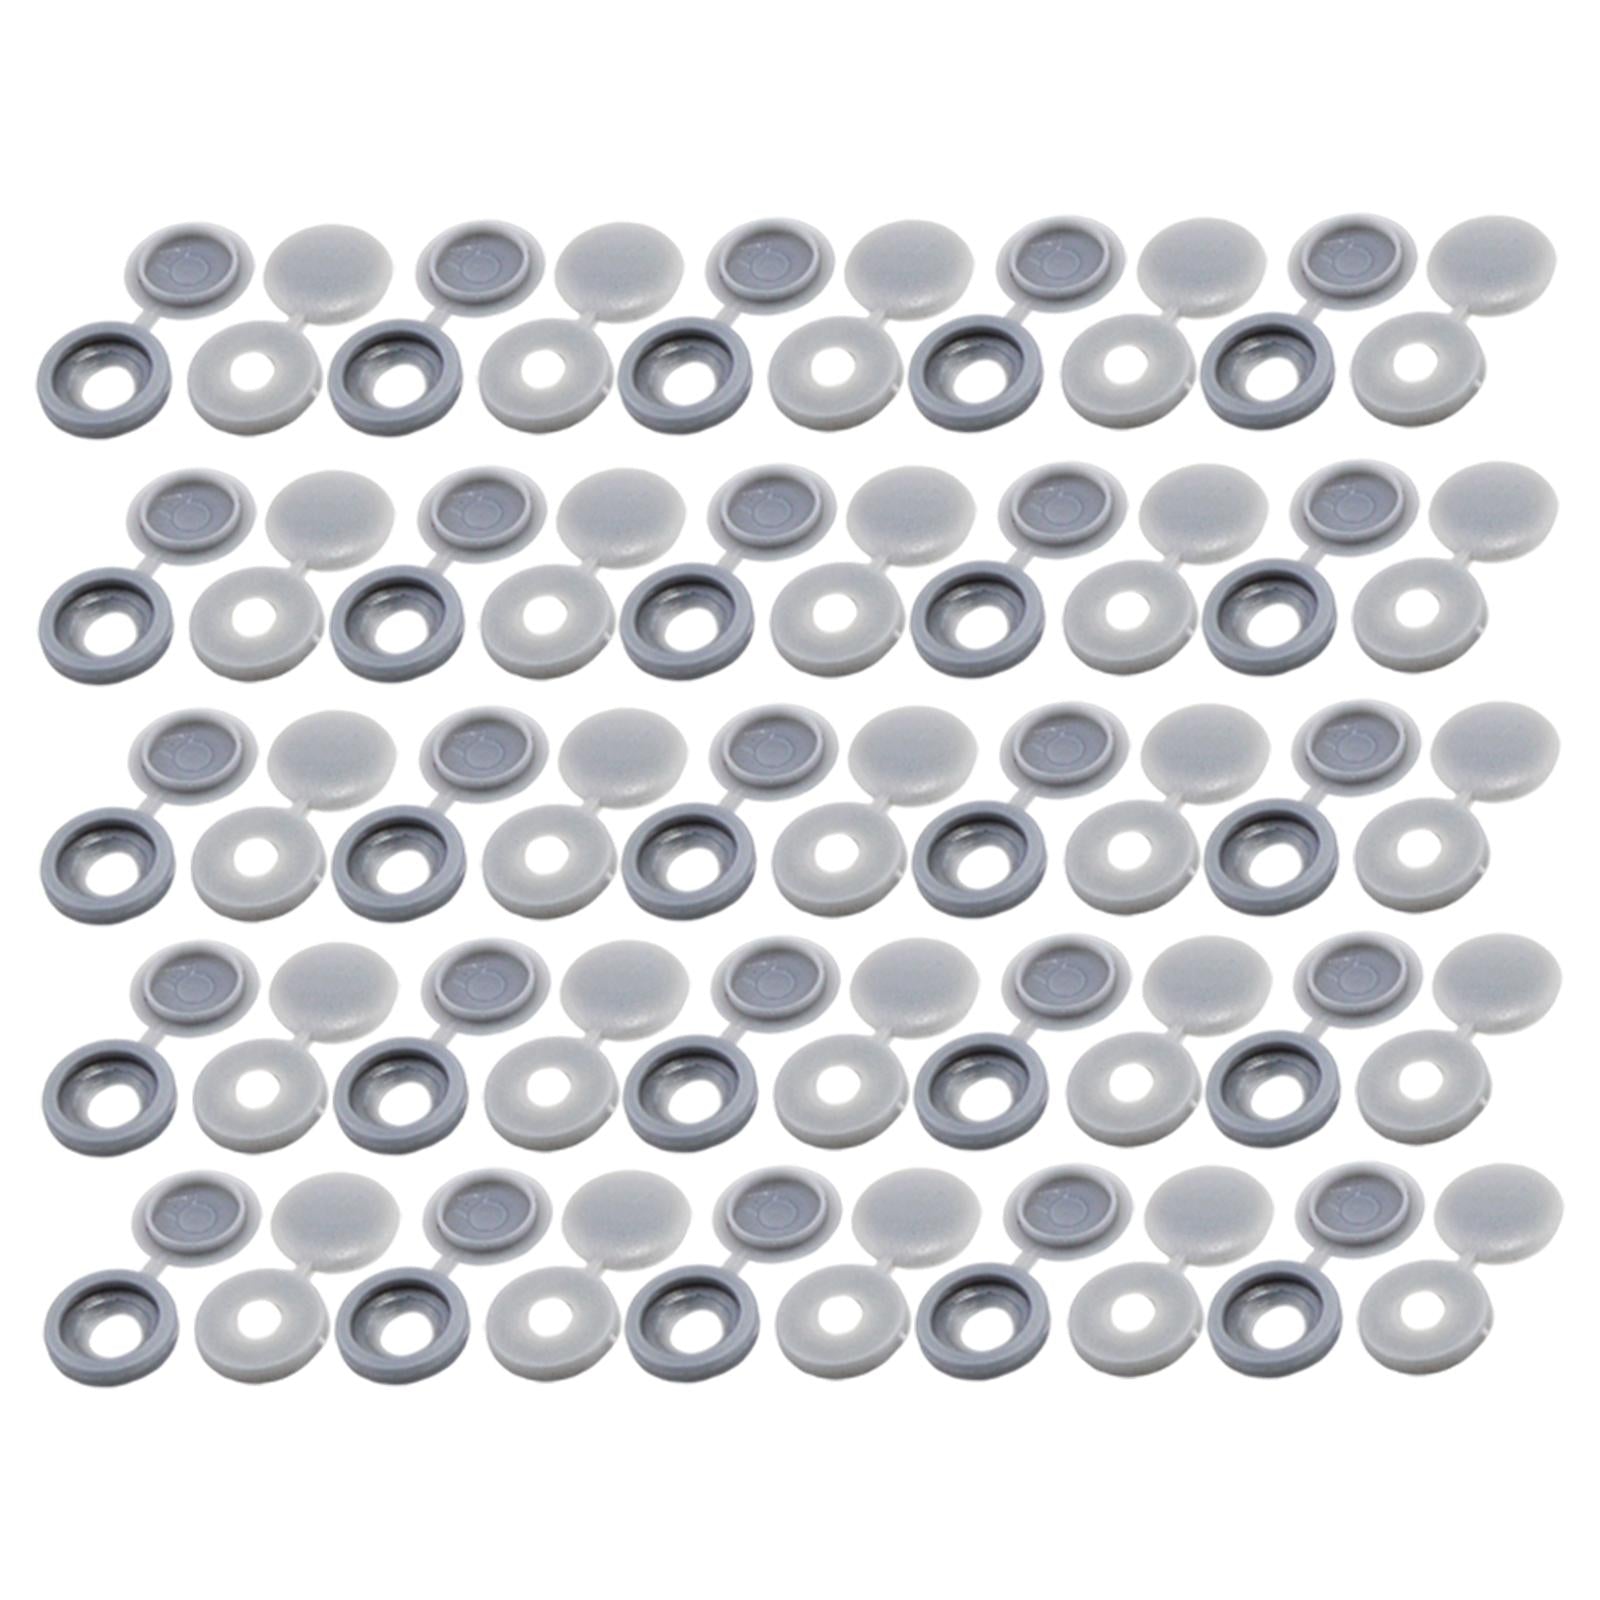 100 Pieces Screw Covers, Practical Screws Caps for Replacement Tools Yard Grey